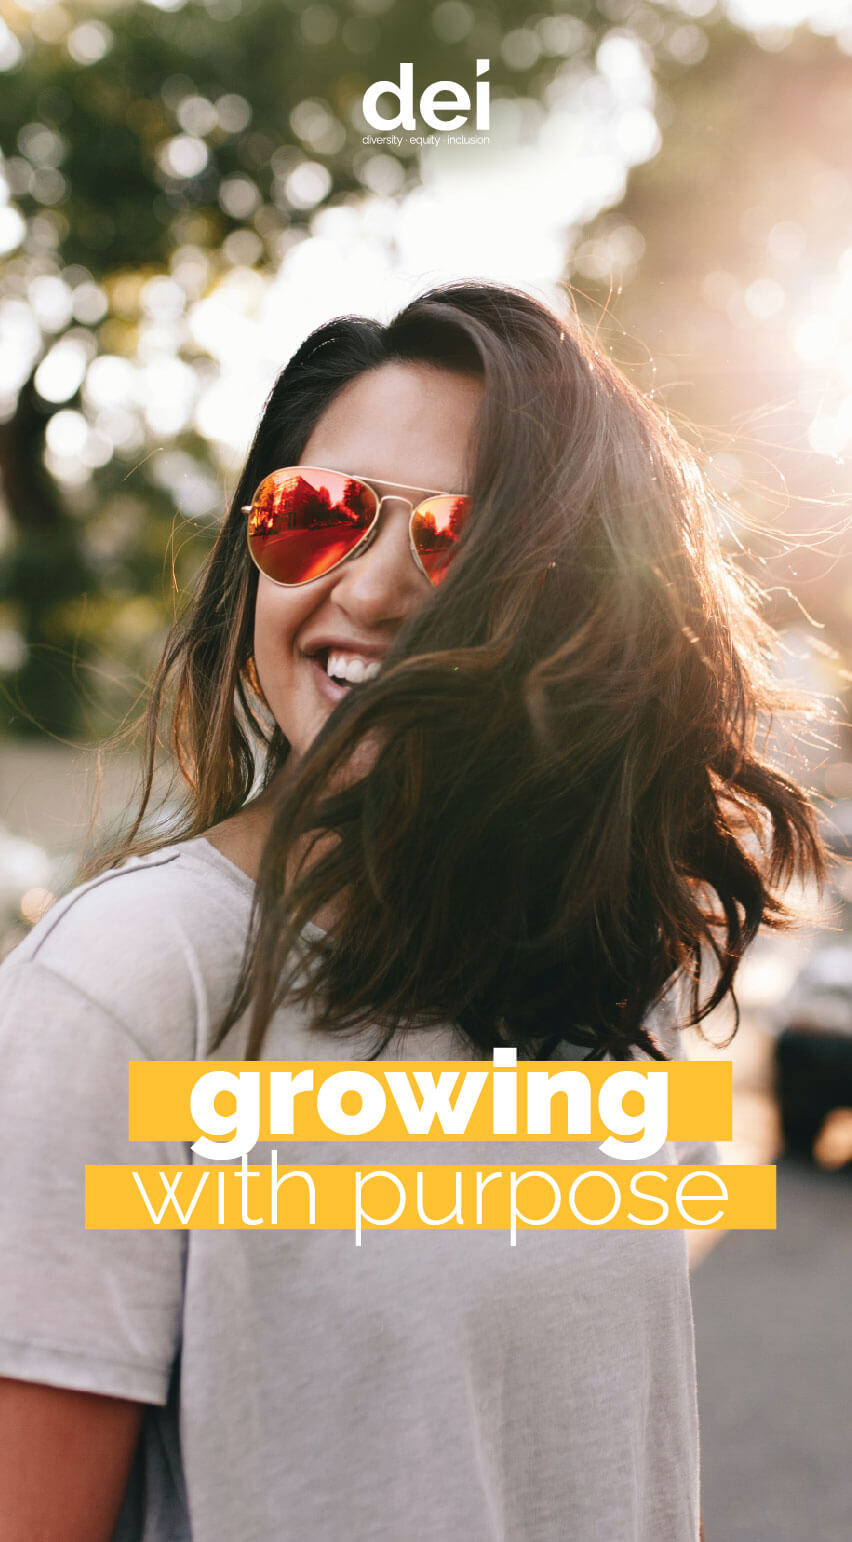 Woman with Sunglasses - Growing with Purpose